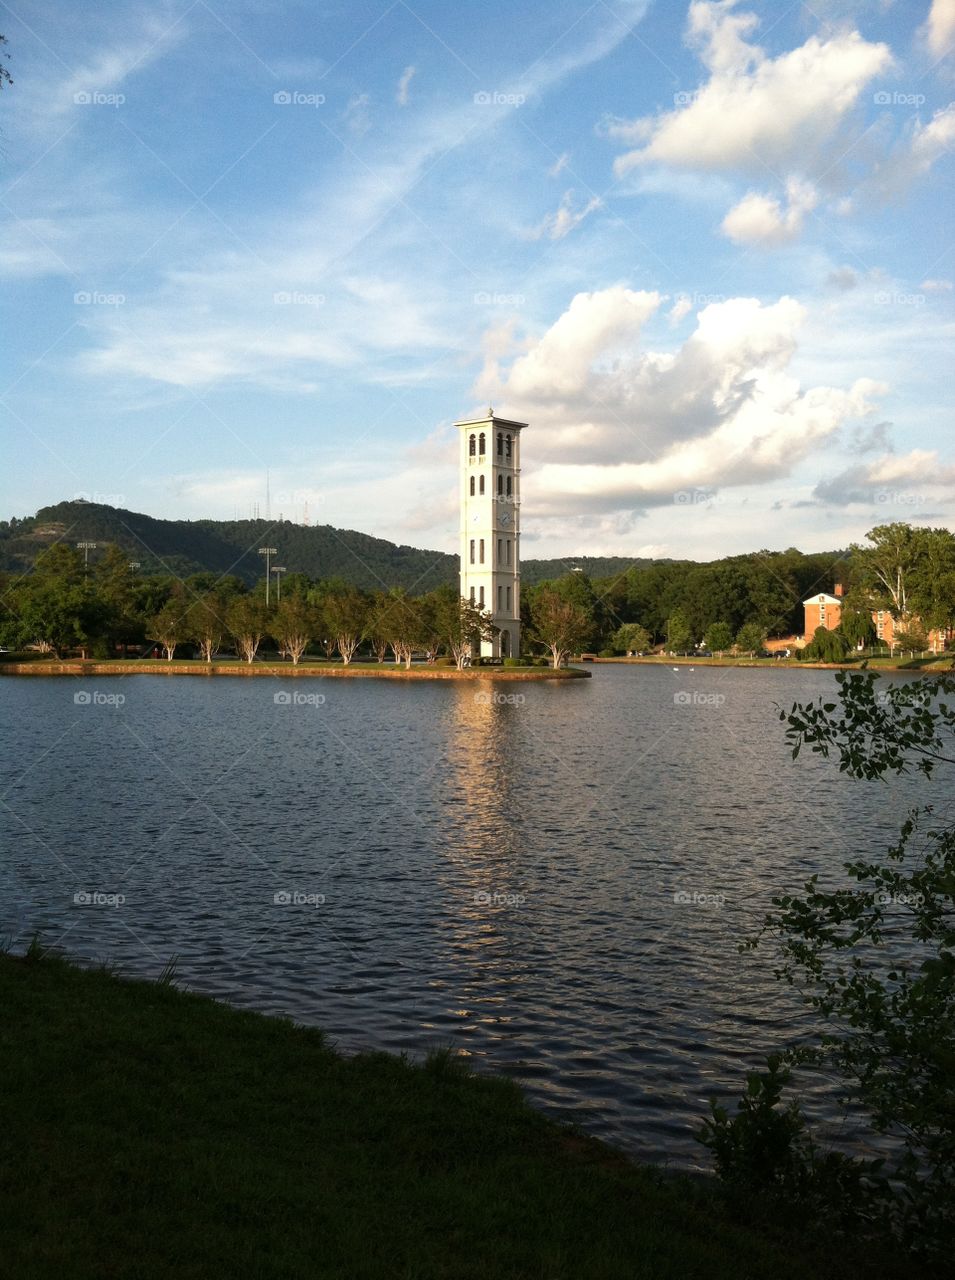 A view of the Bell Tower across the lake at Furman University, Greenville, SC.